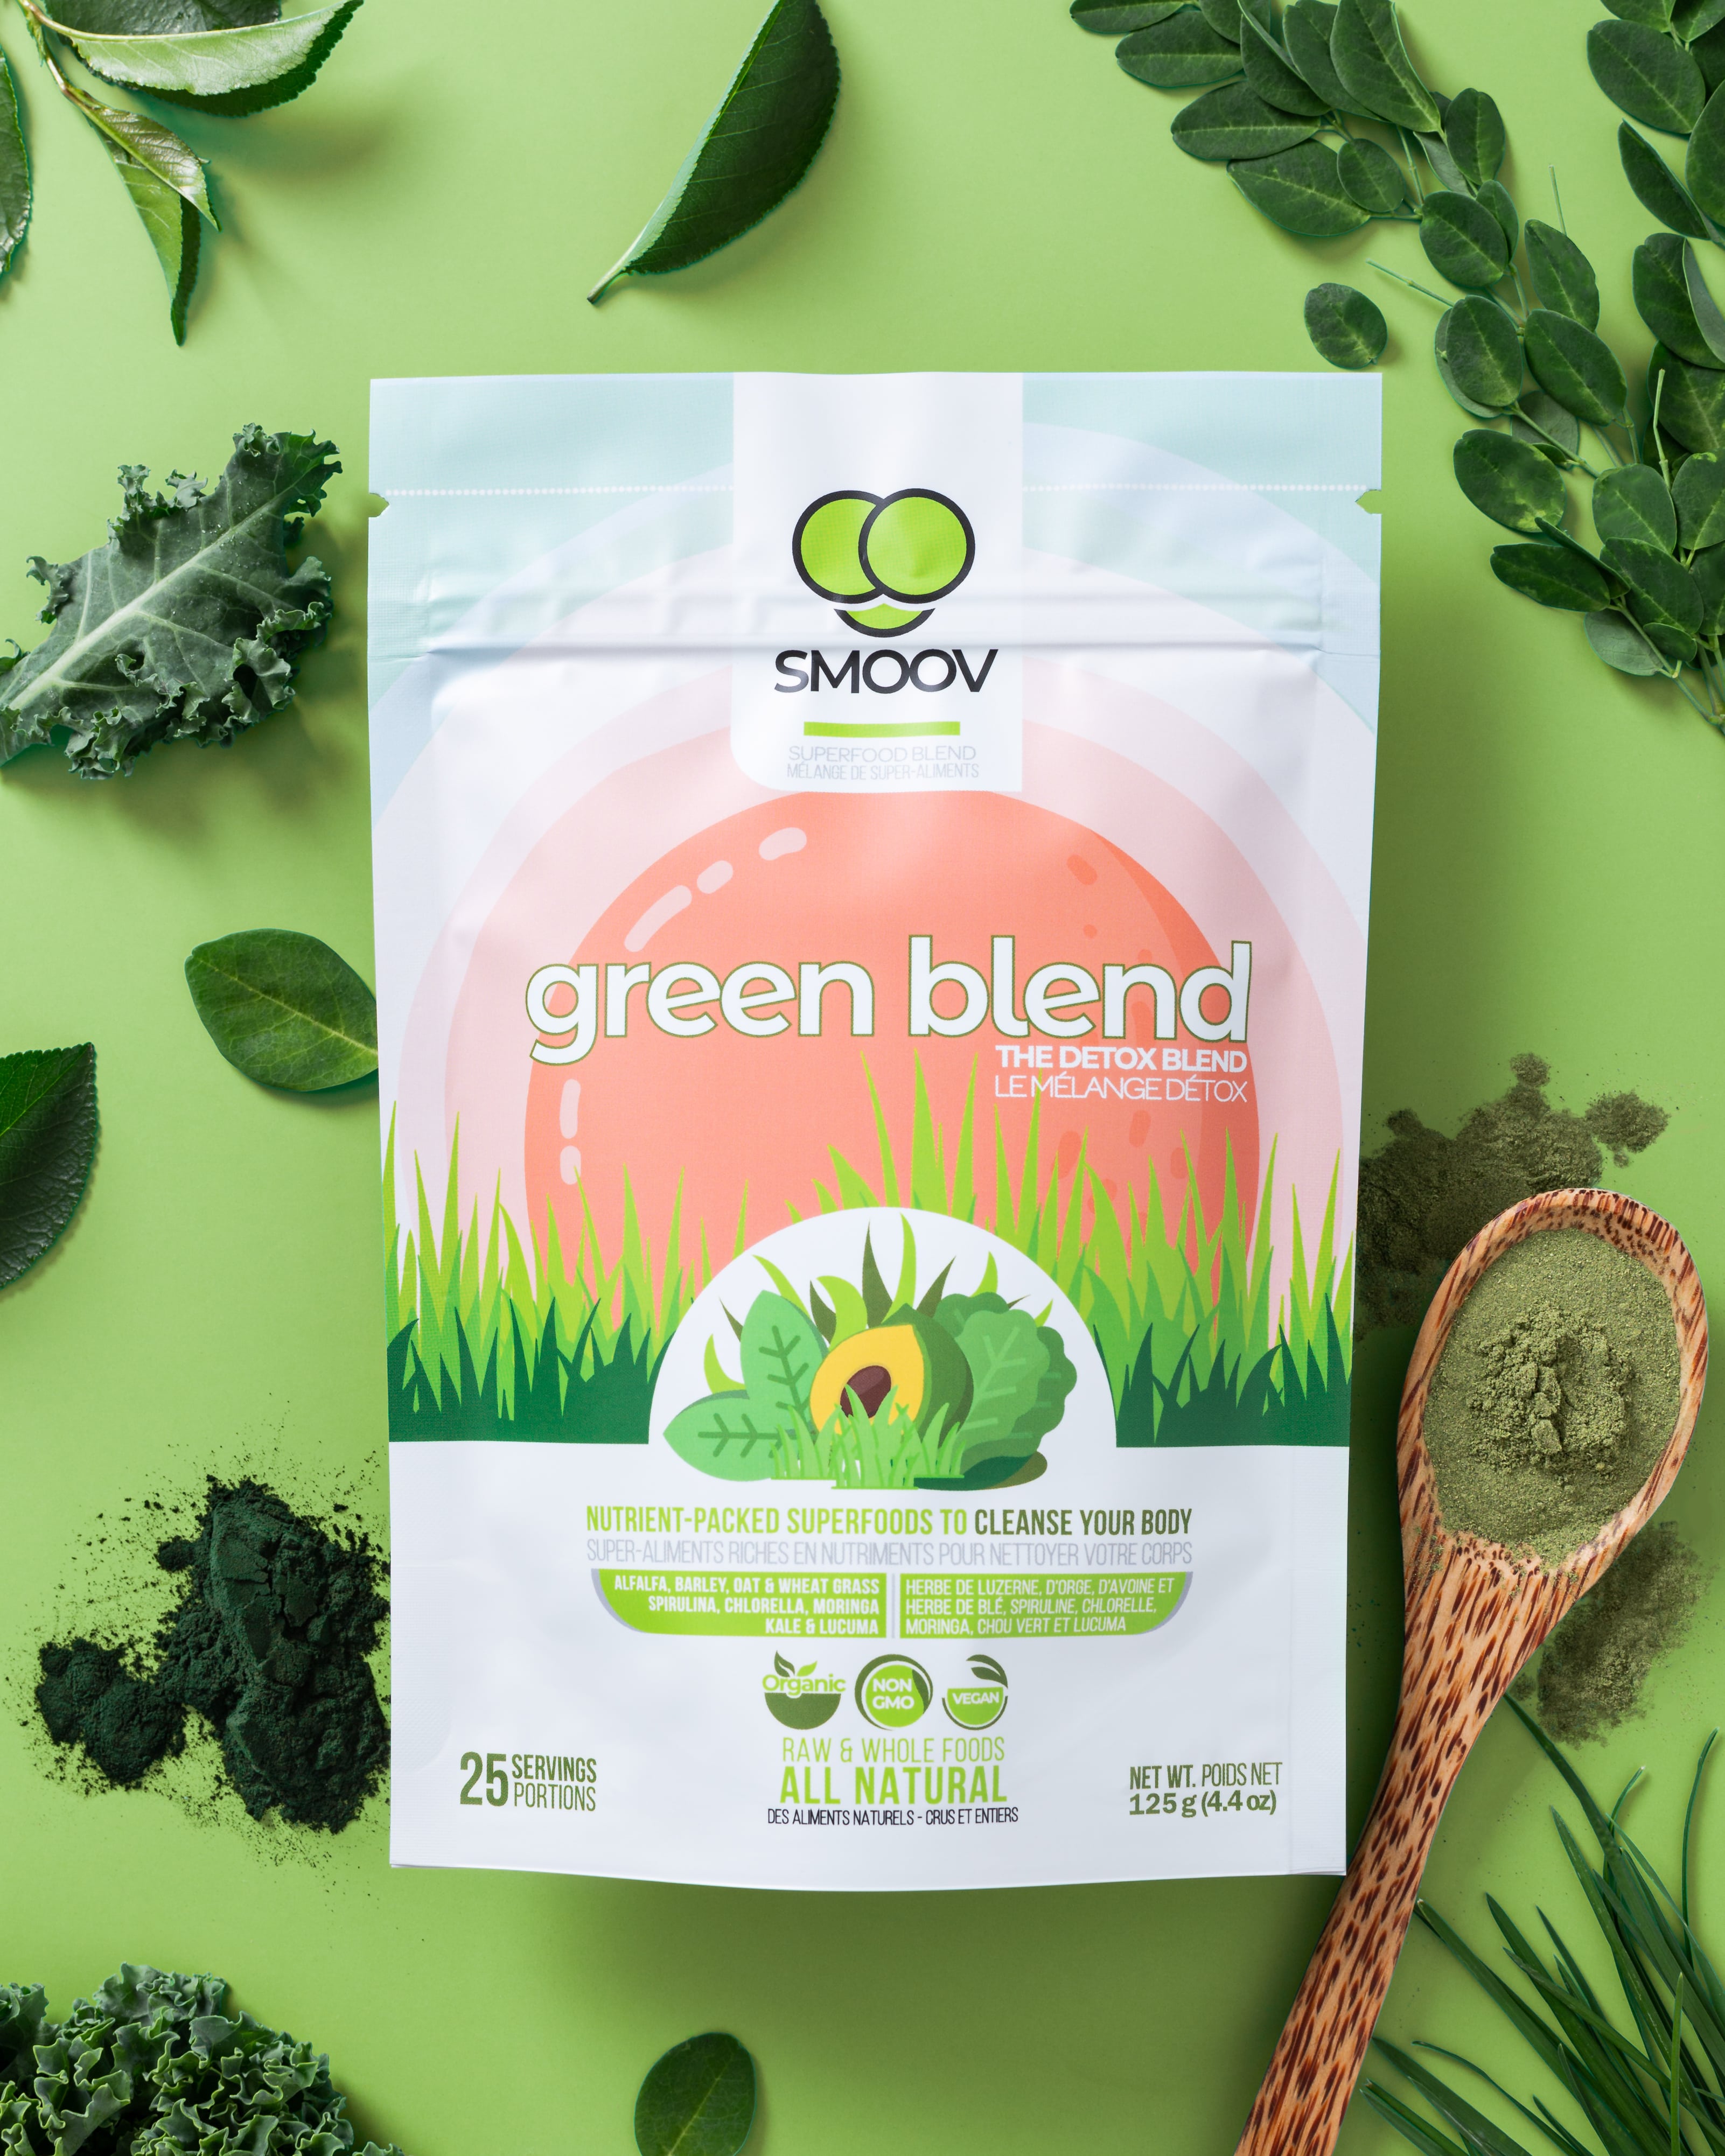 Our green blend is made to help your body detox and maintain health.